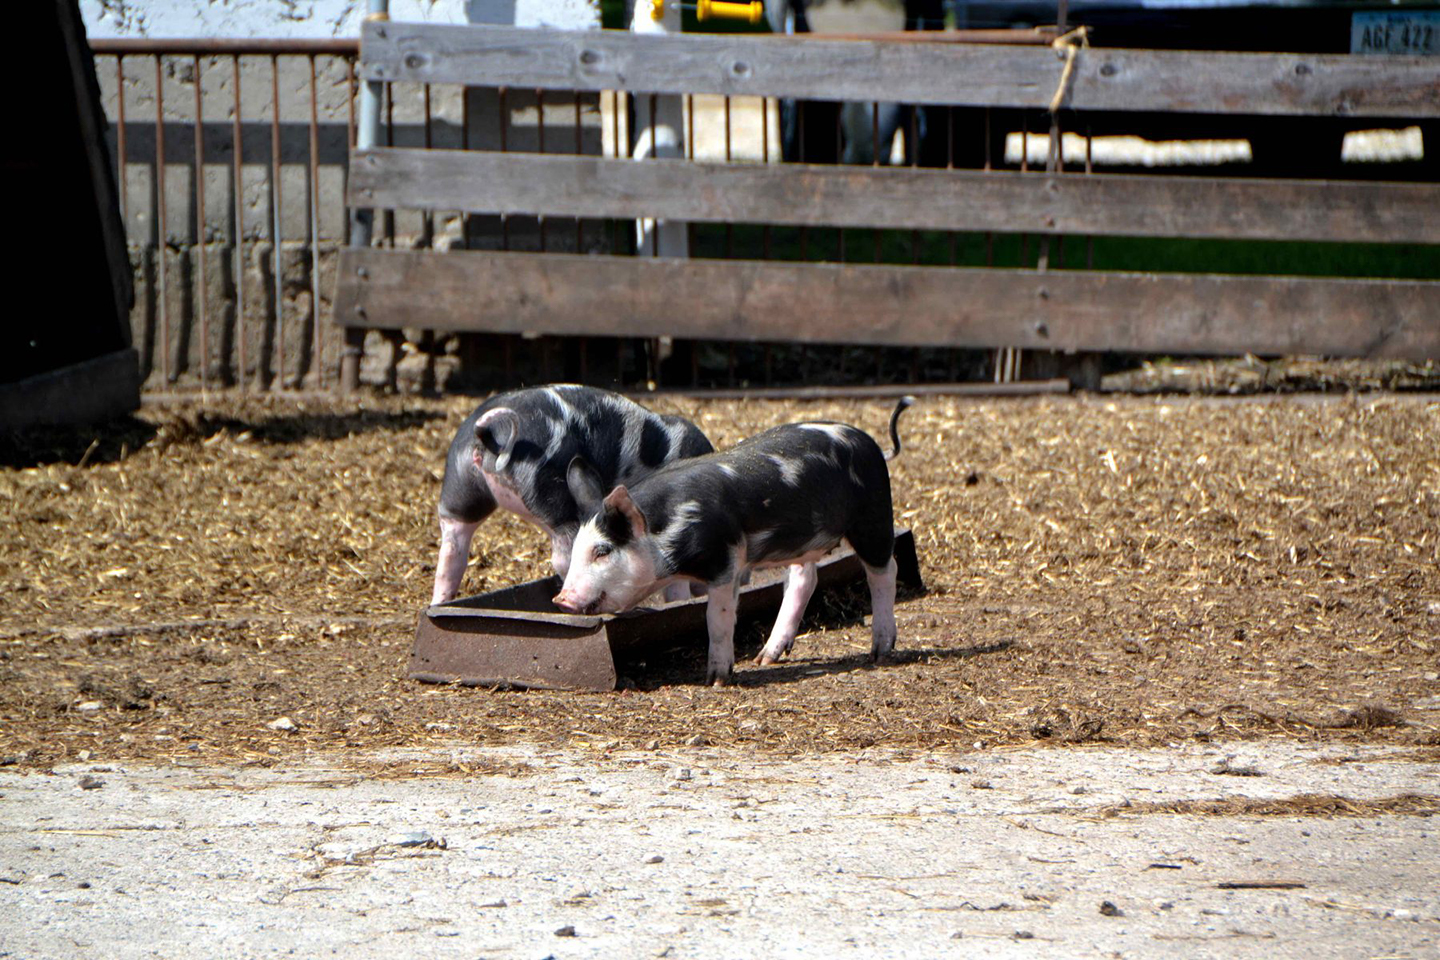 Joia Farms pigs